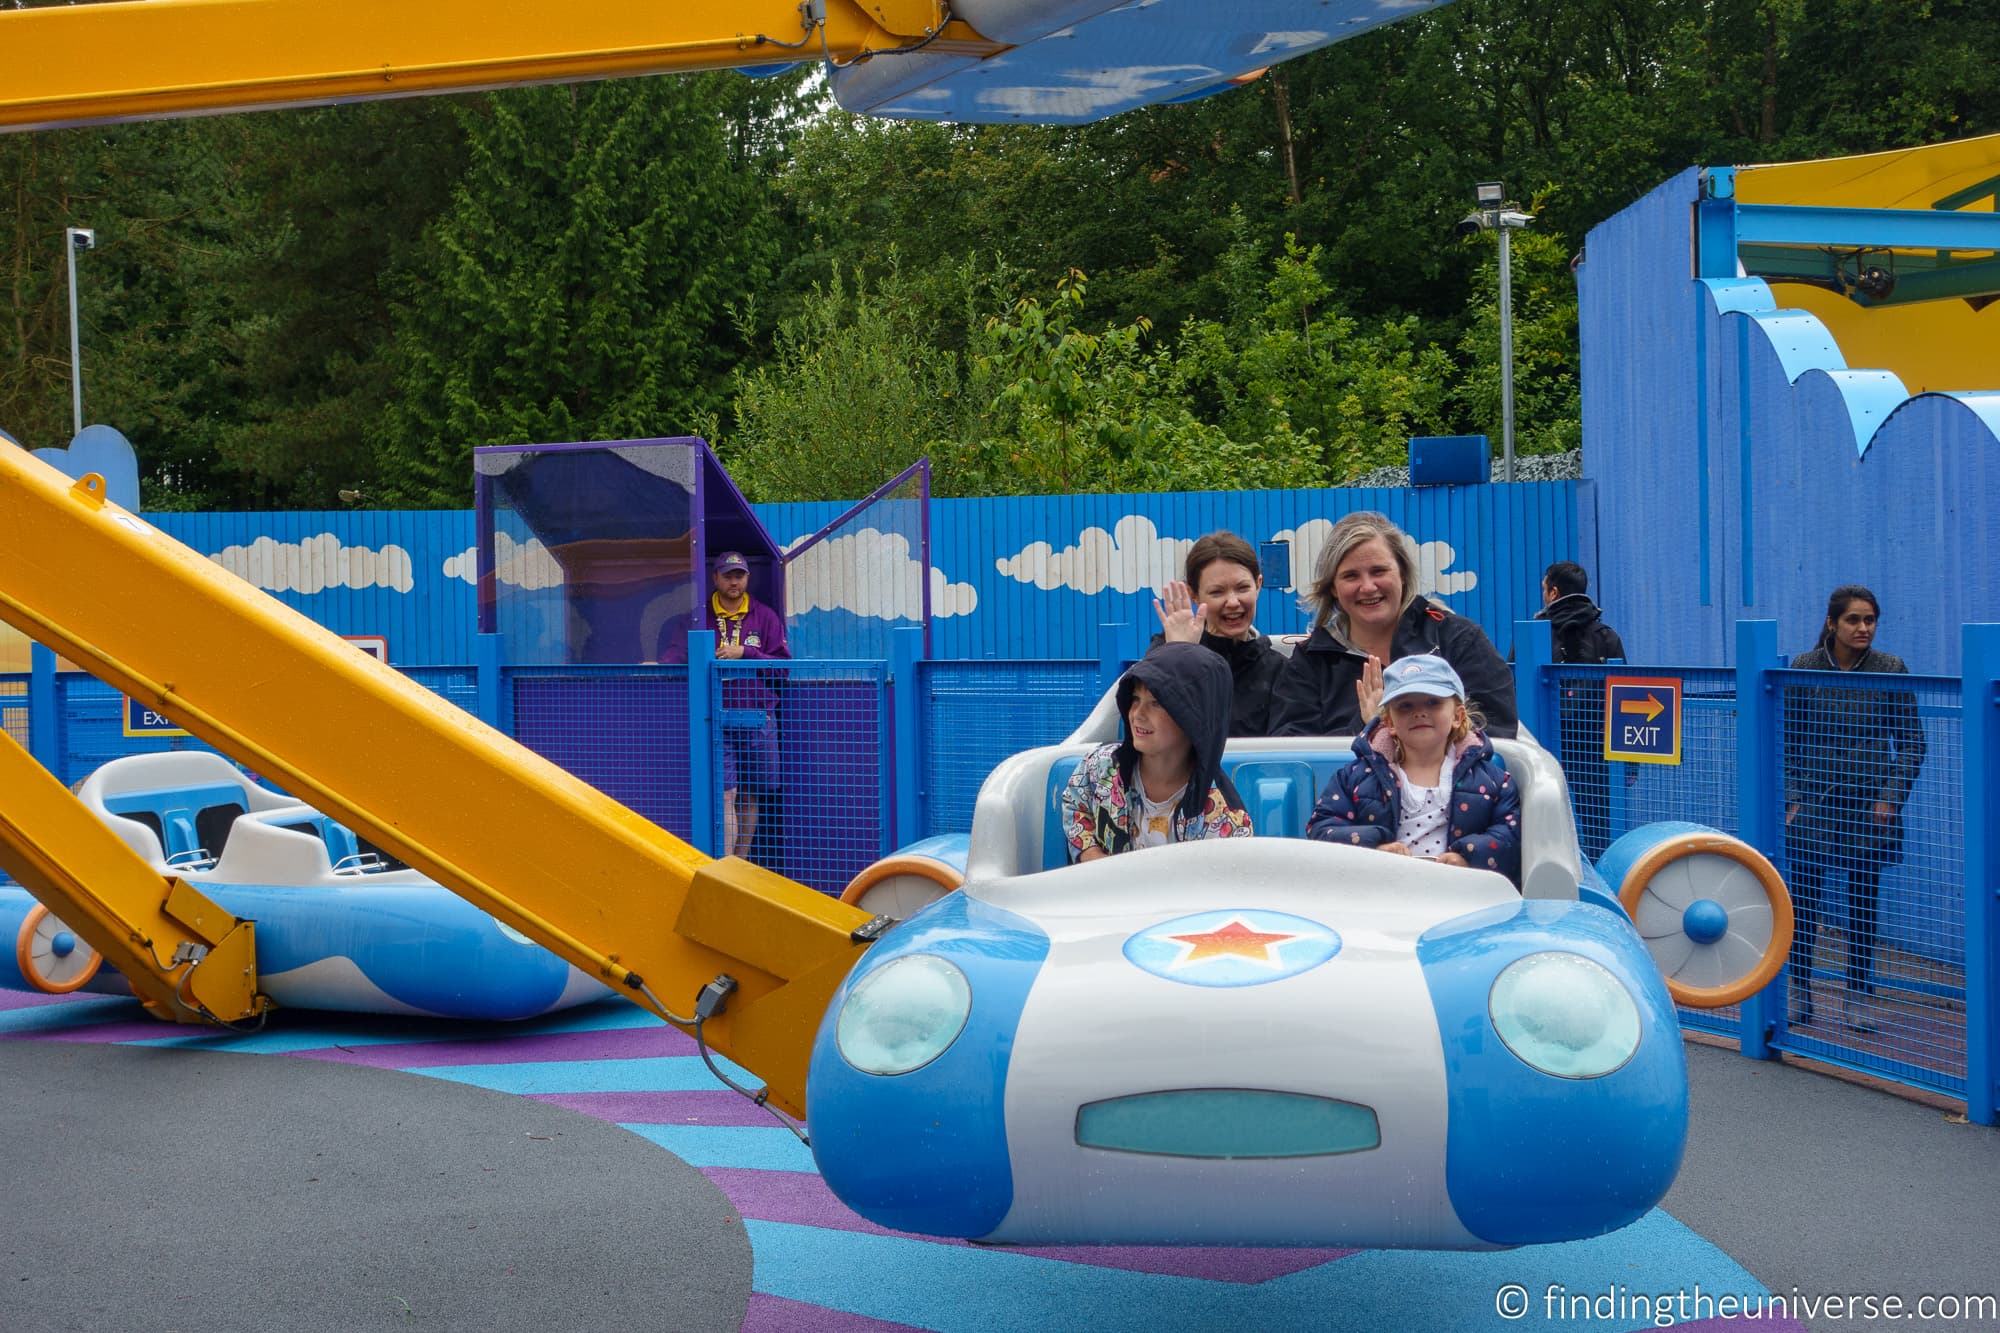 Go Jetters Vroomster Zoom Ride Alton Towers